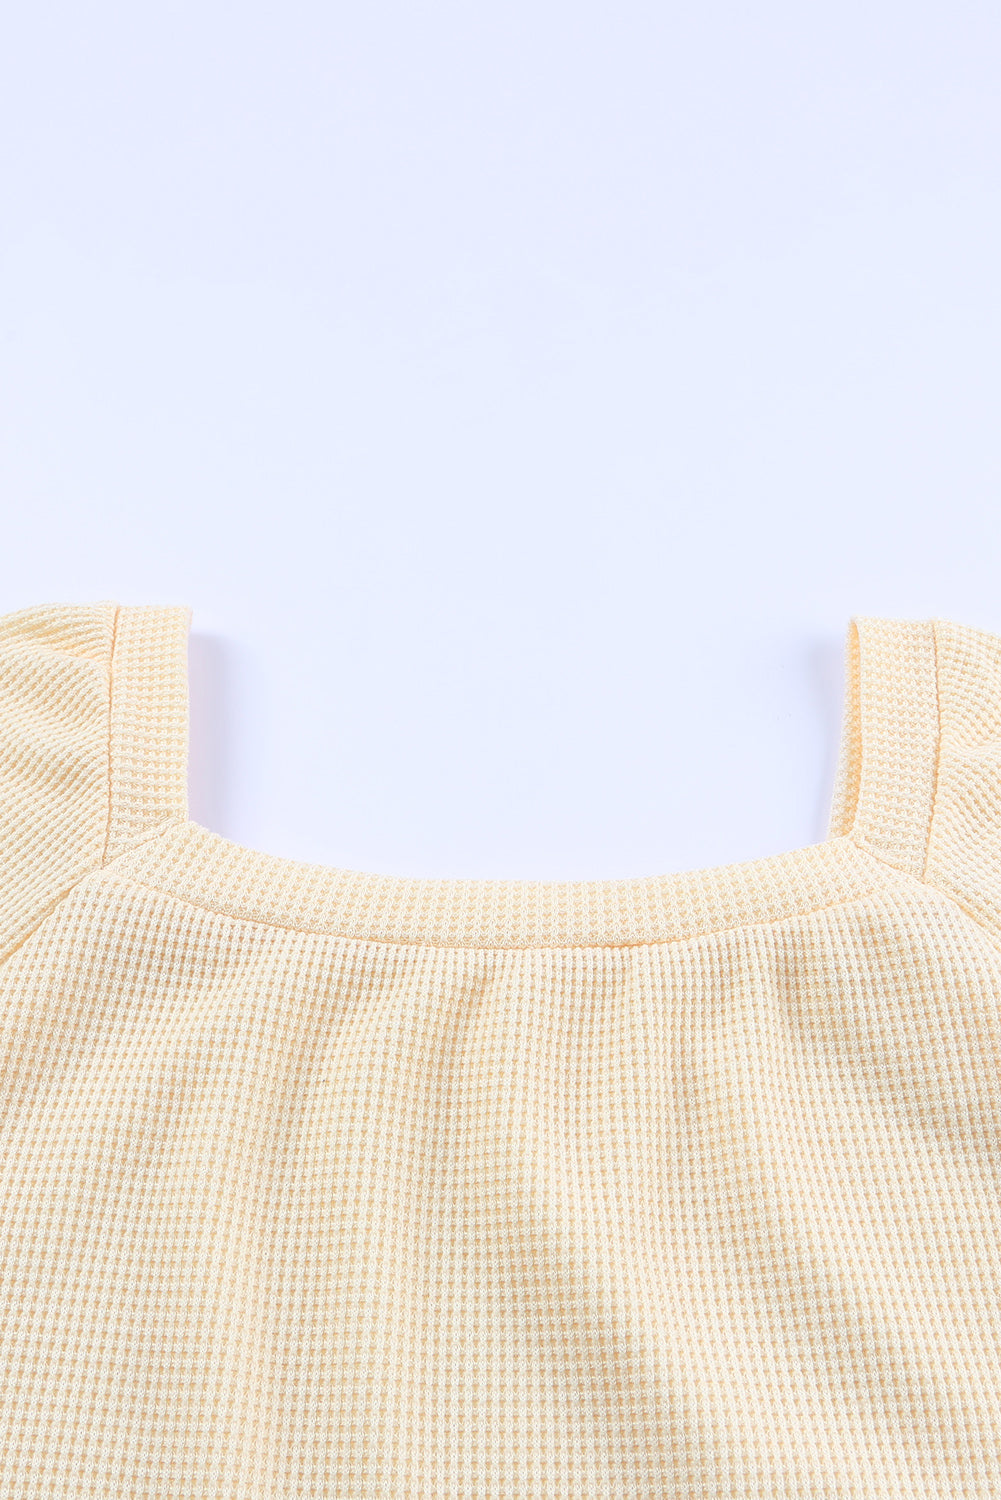 Green Scoop Neck Puff Sleeve Waffle Knit Top